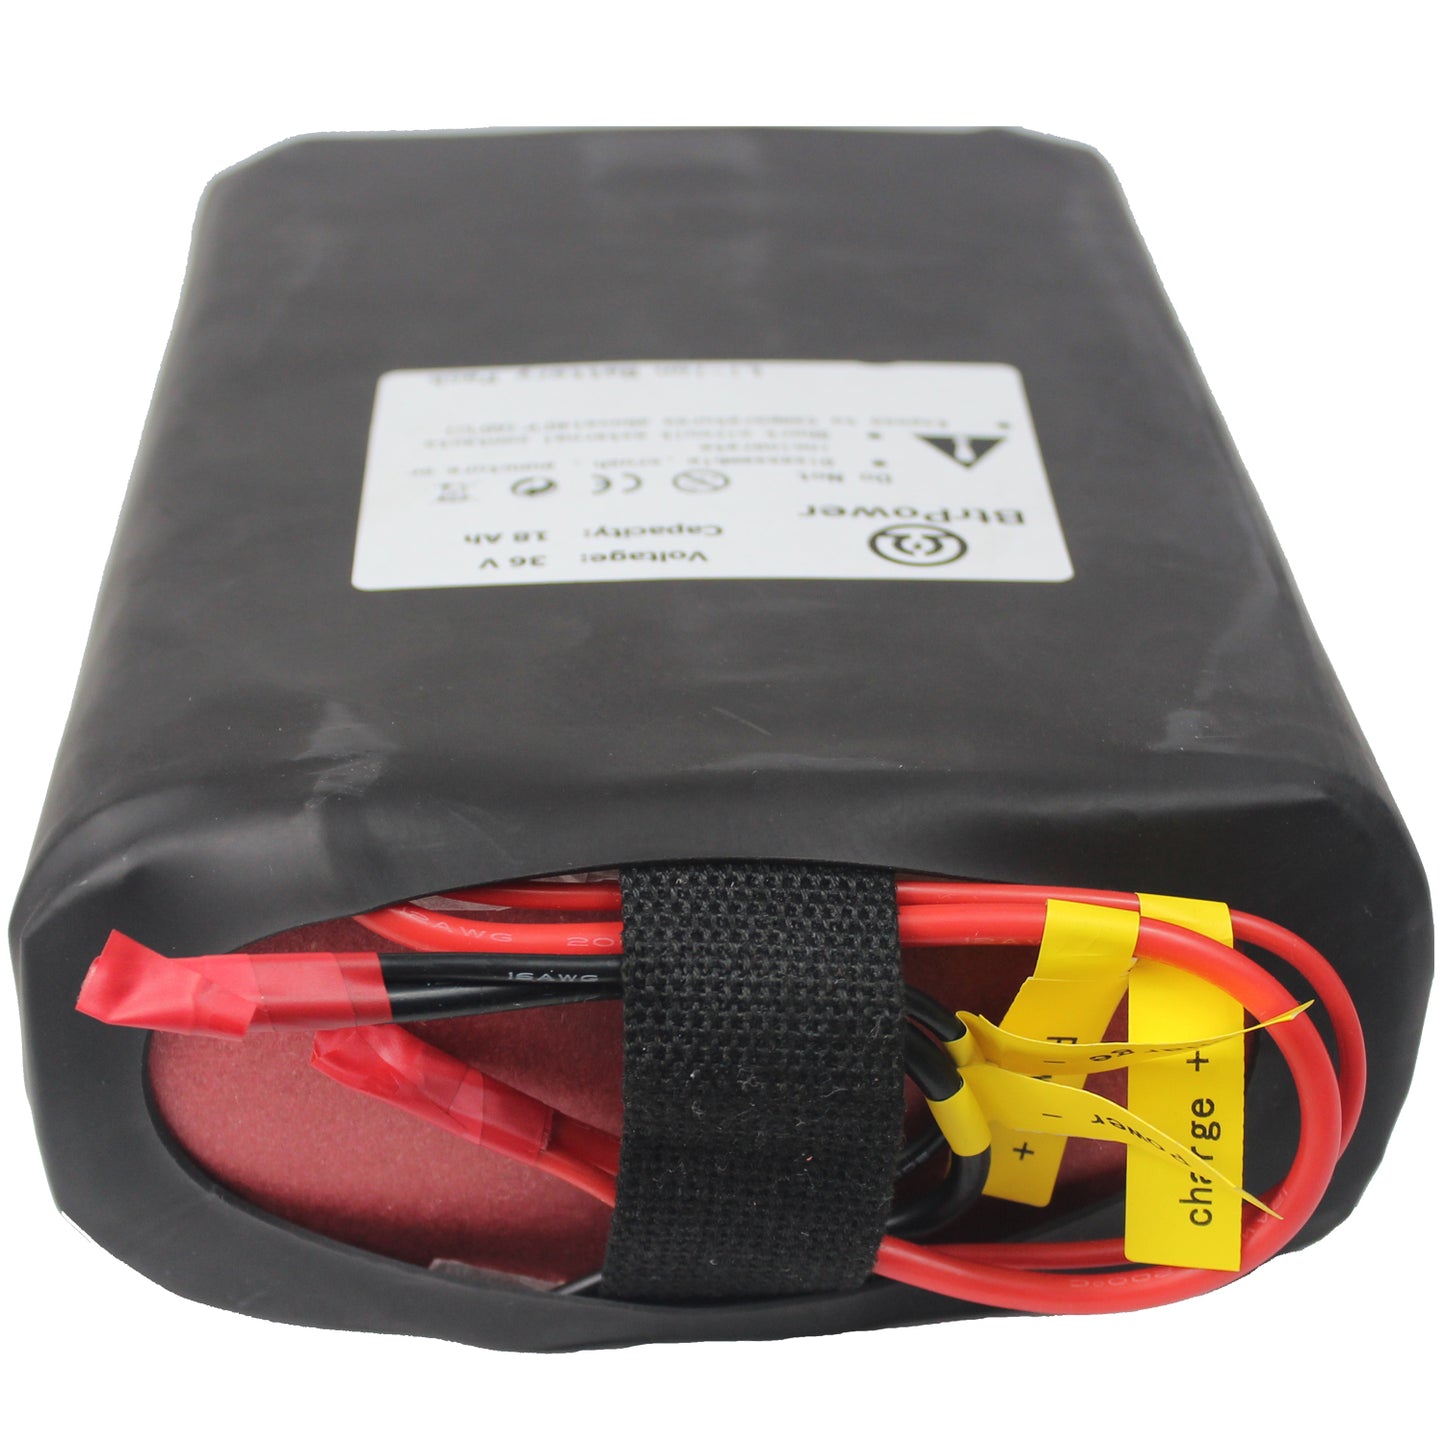 BtrPower Ebike Battery 36V 18AH Li-ion Battery Pack with 3A Charger, 30A BMS